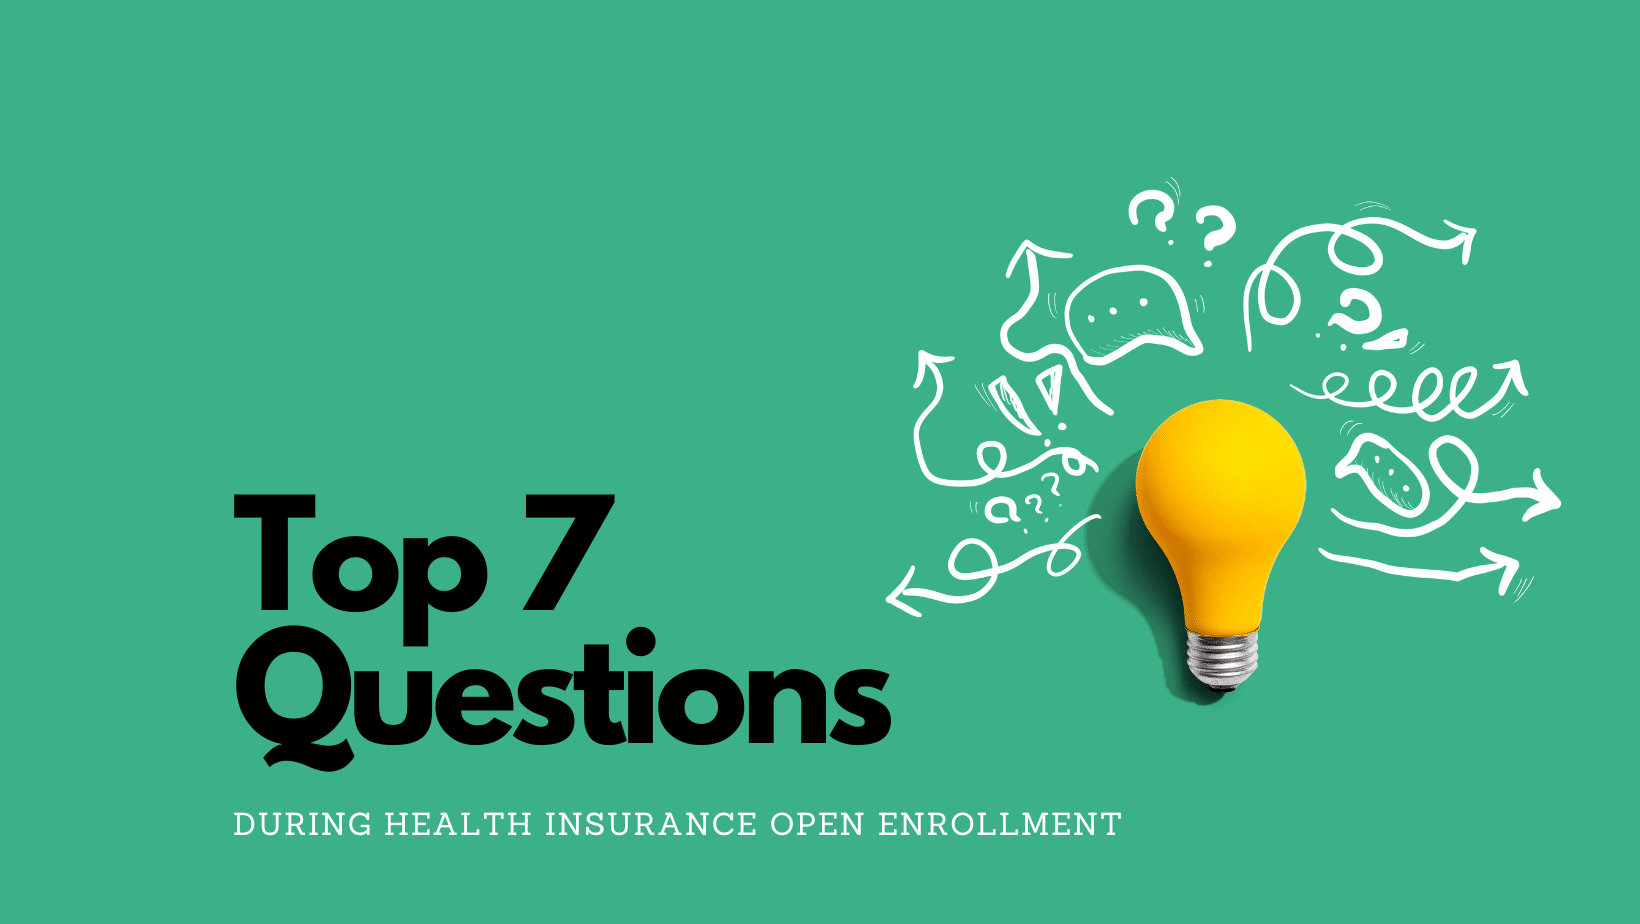 Top 7 Health Insurance Questions During Open Enrollment